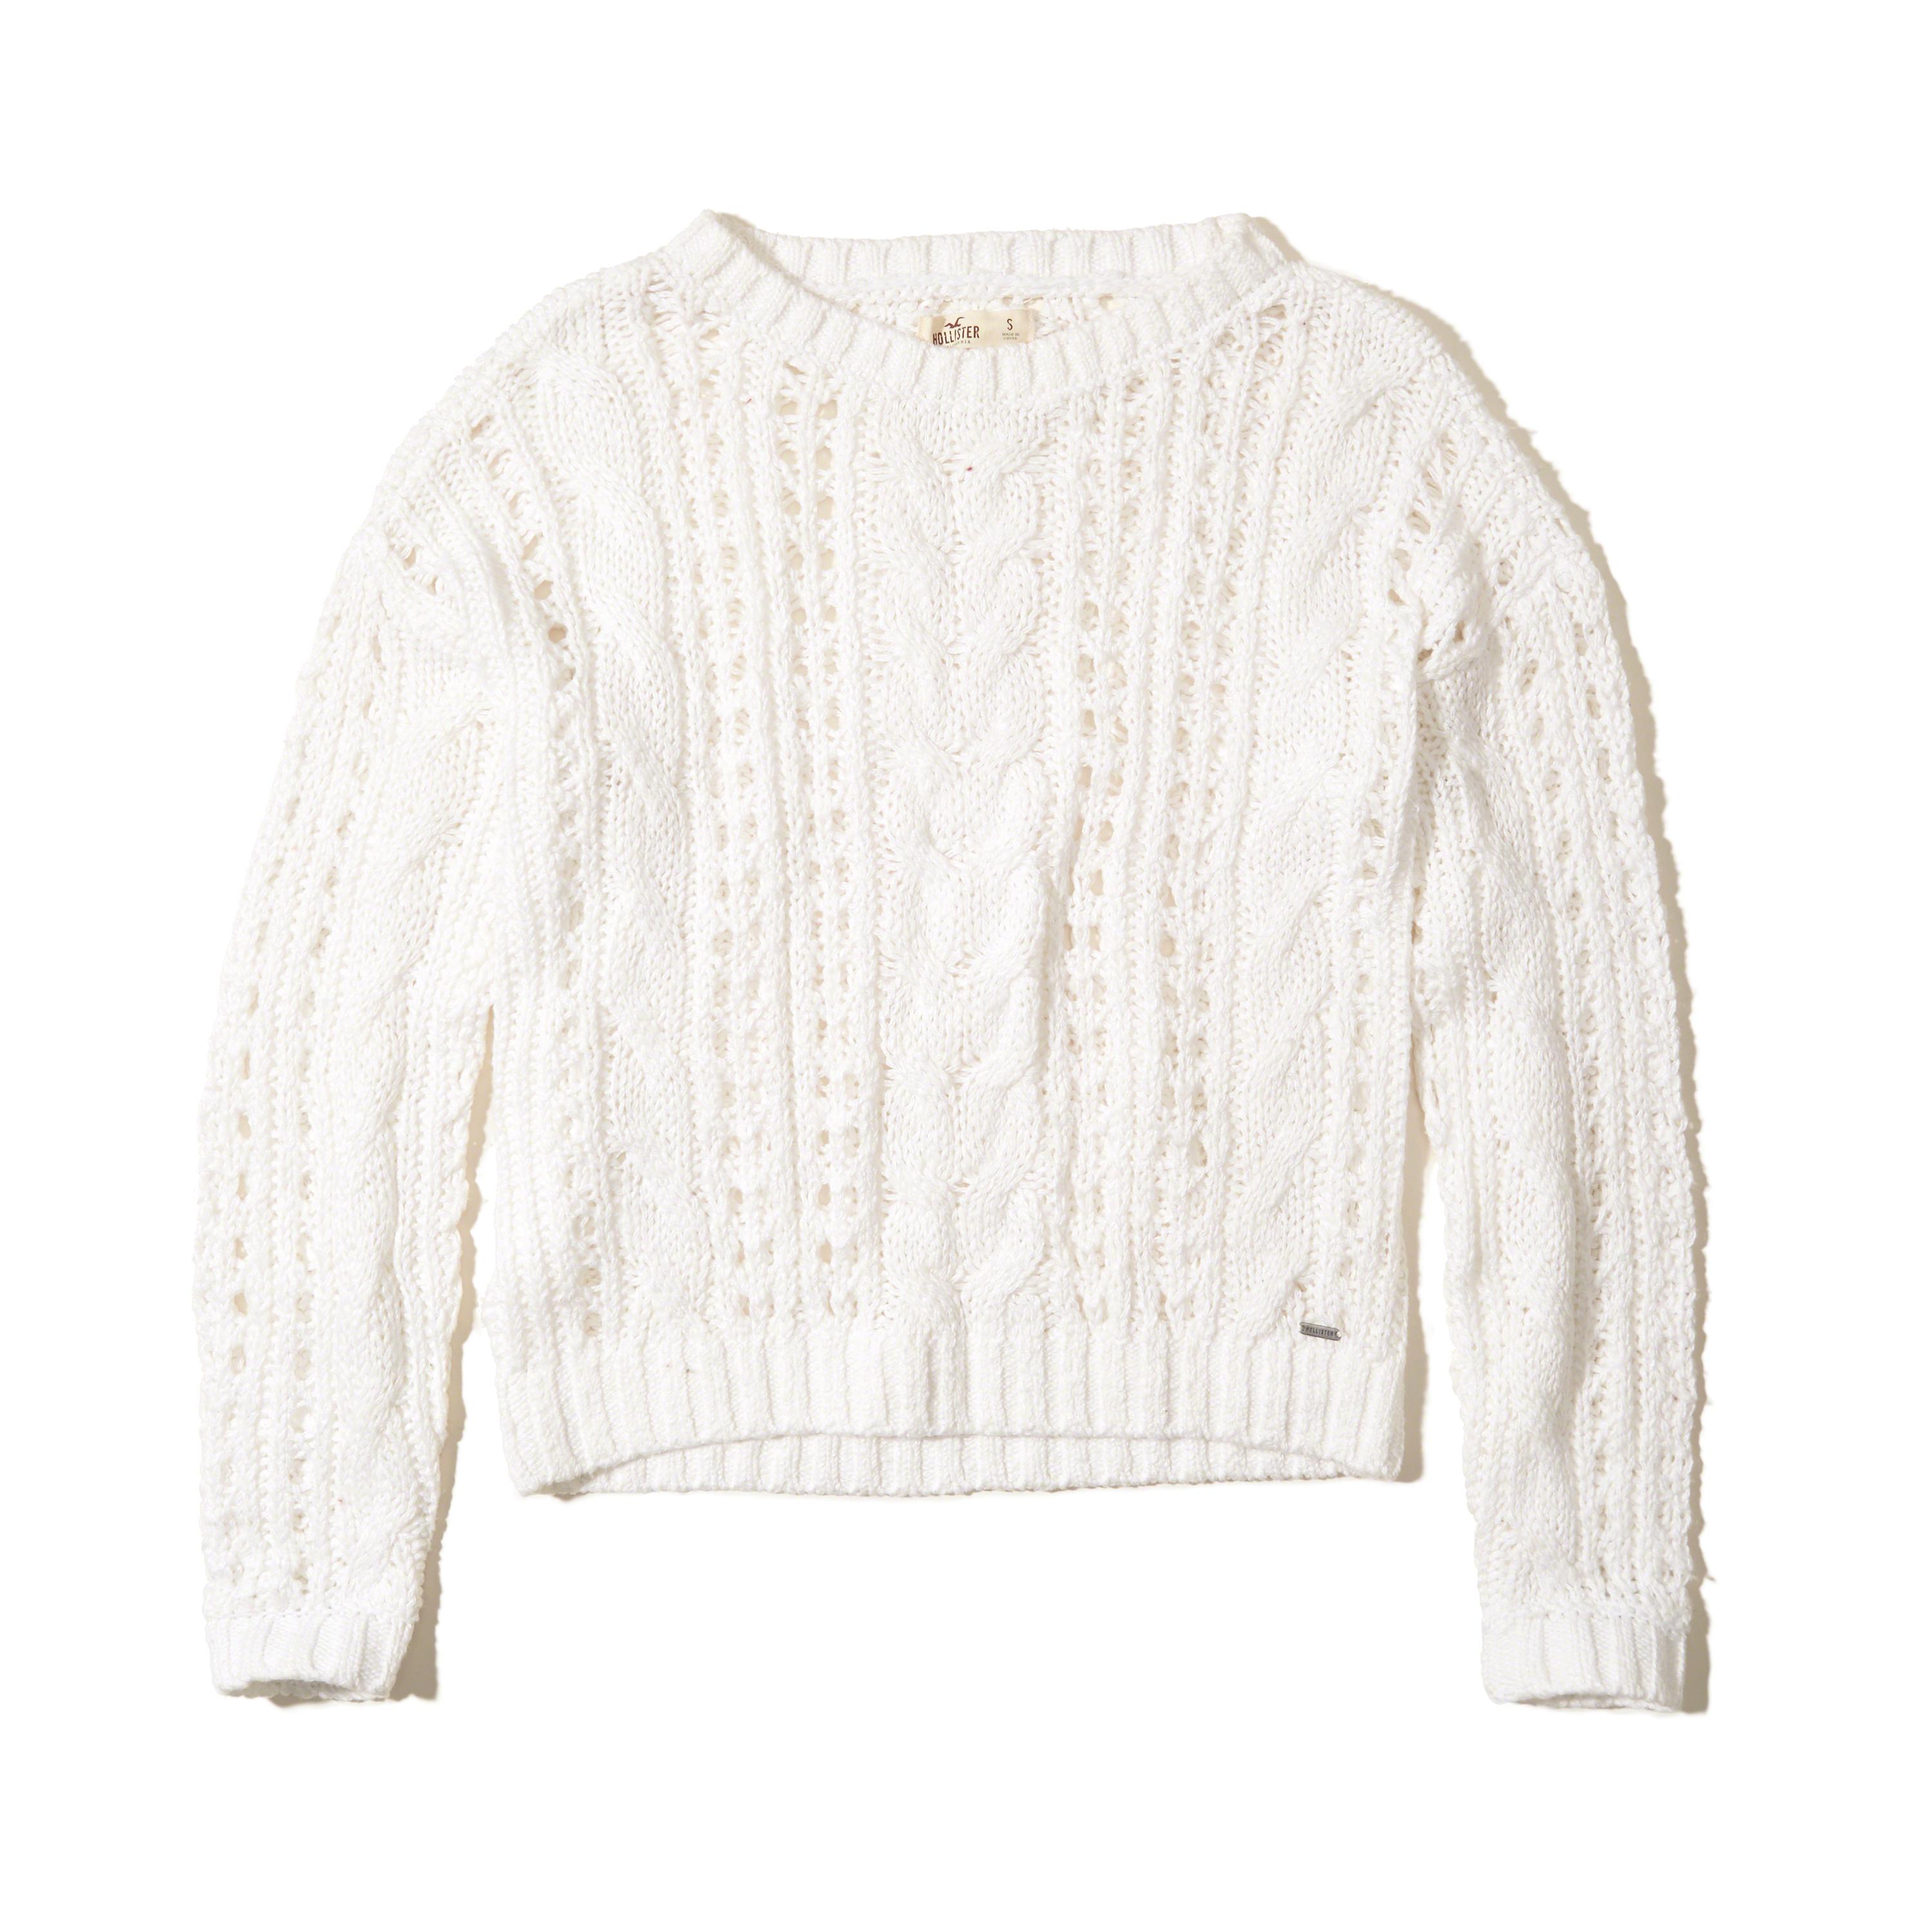 Lyst - Hollister Open Stitch Cable Sweater in White